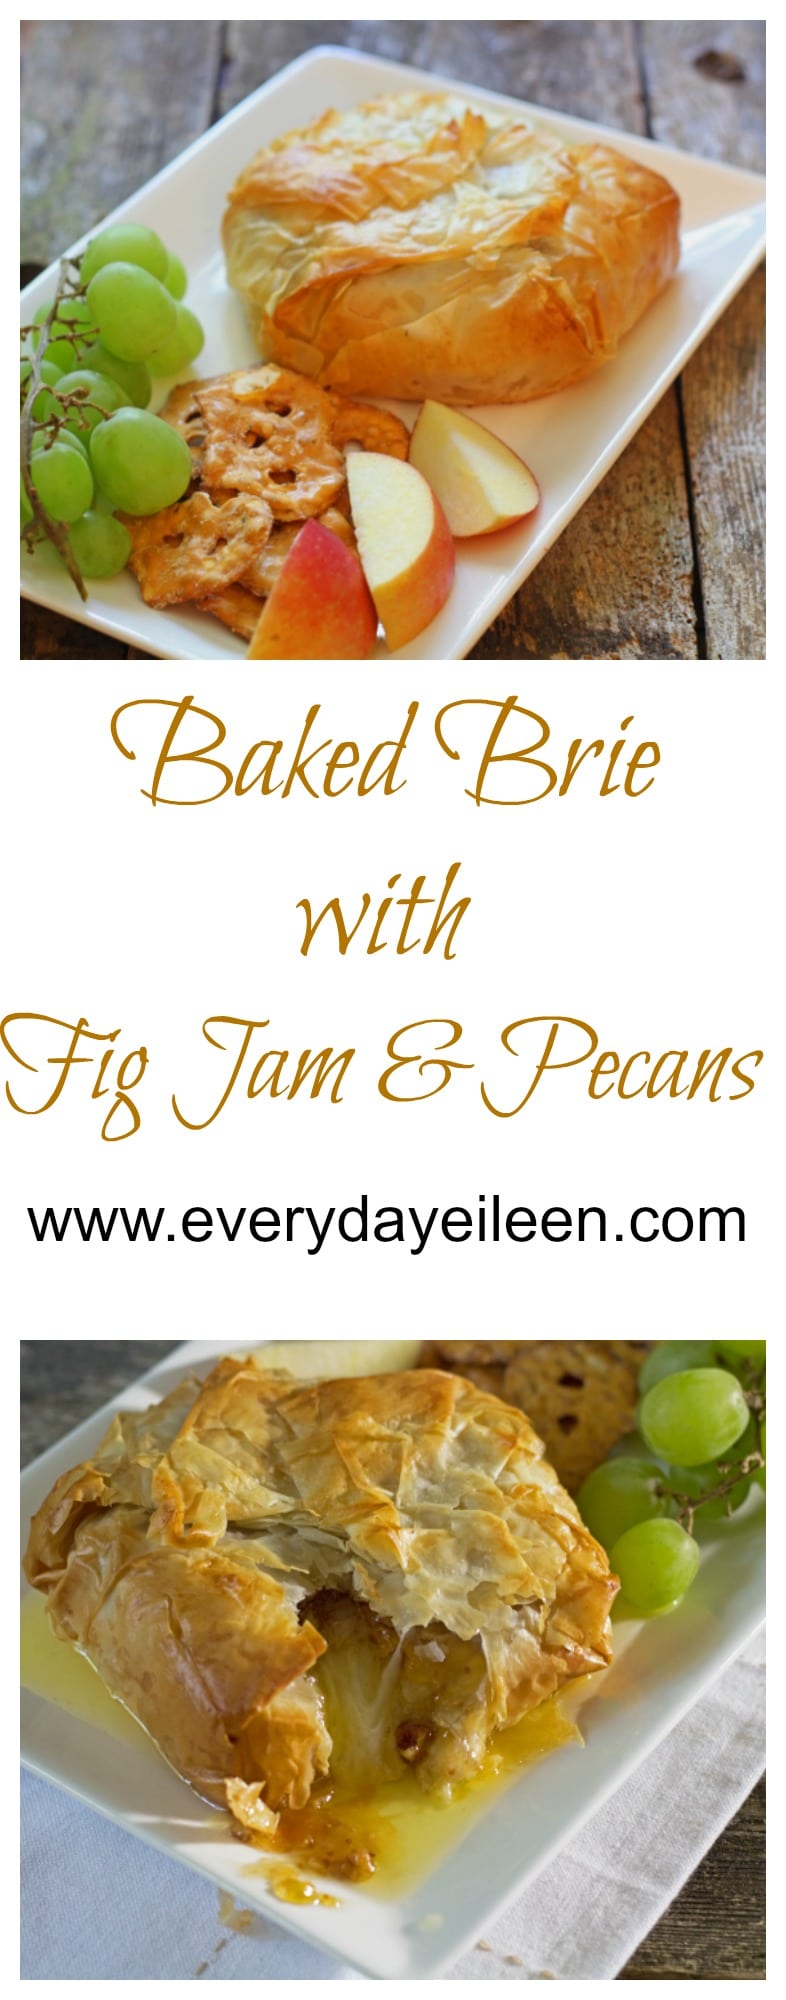 baked-brie-with-fig-jam